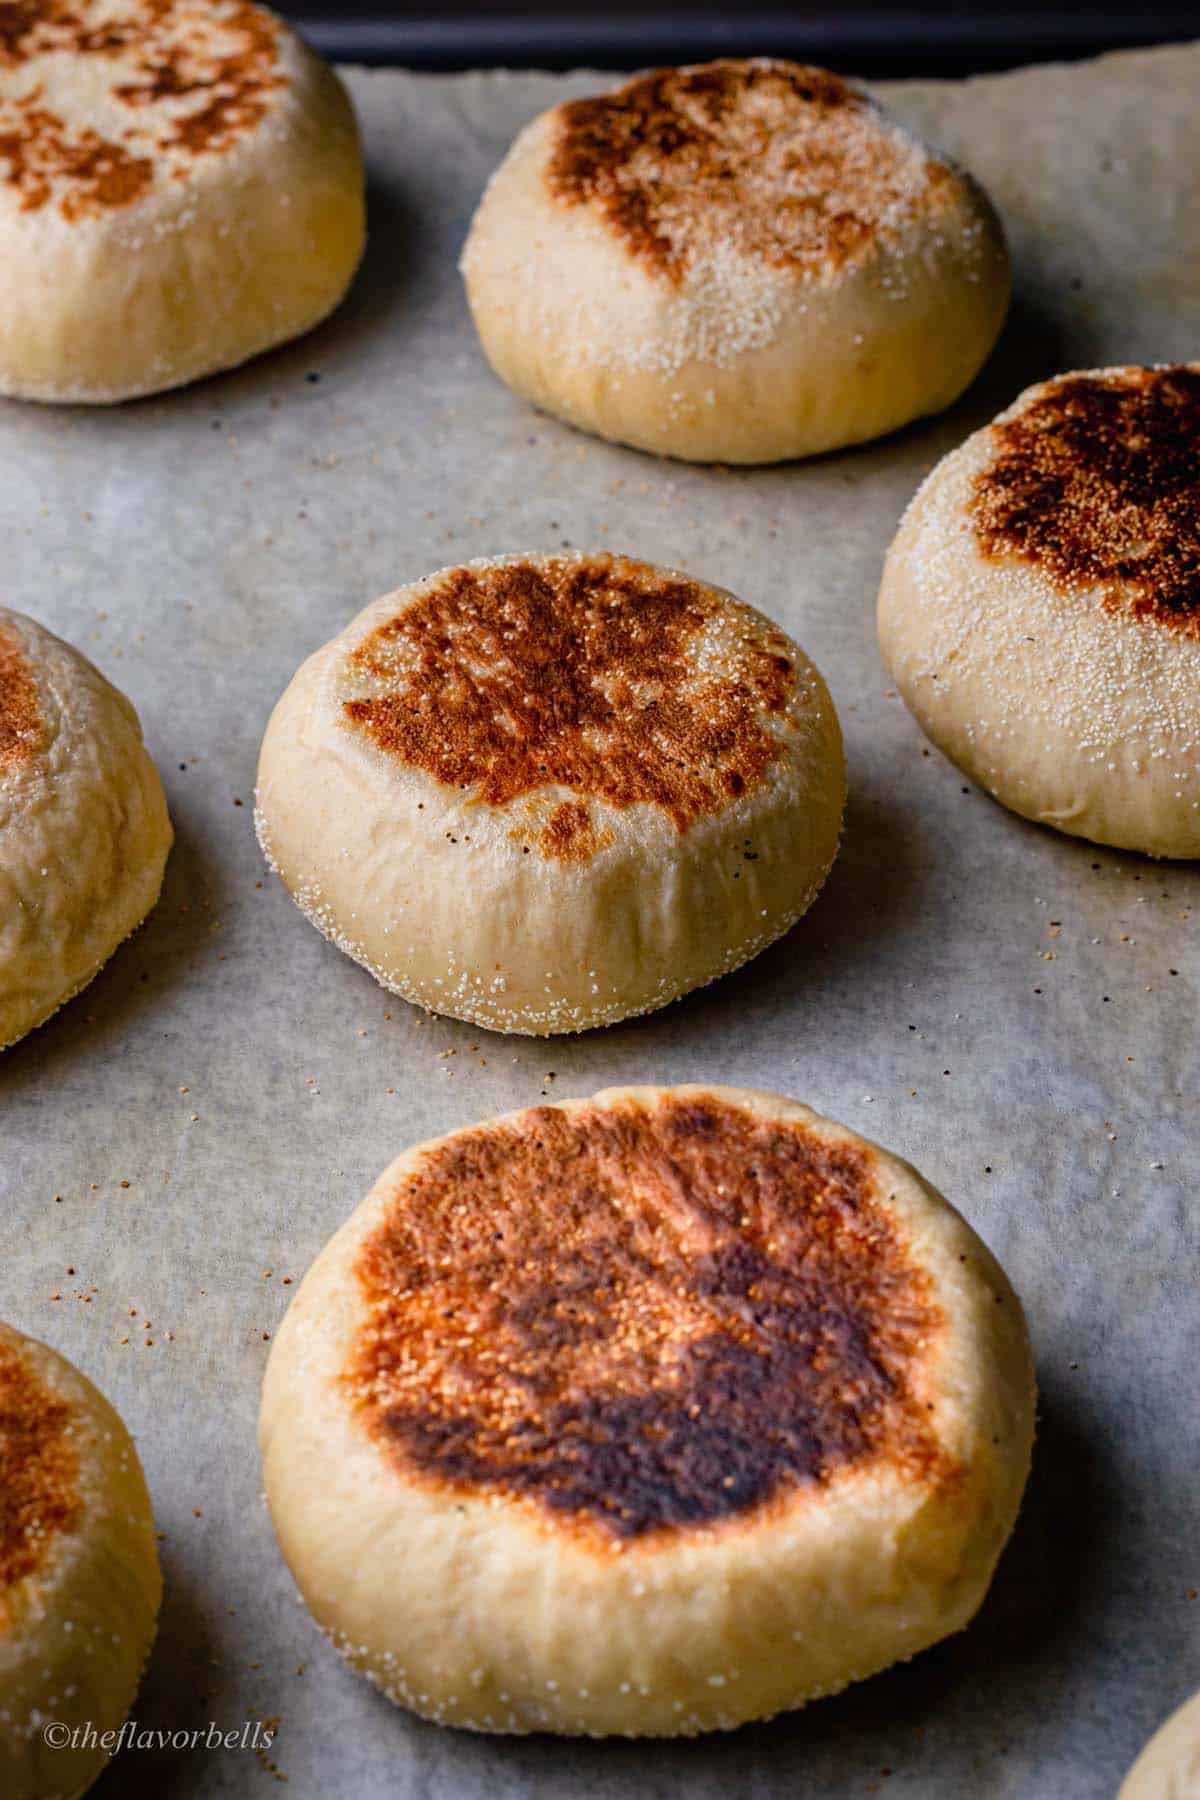  English Muffins finished in oven